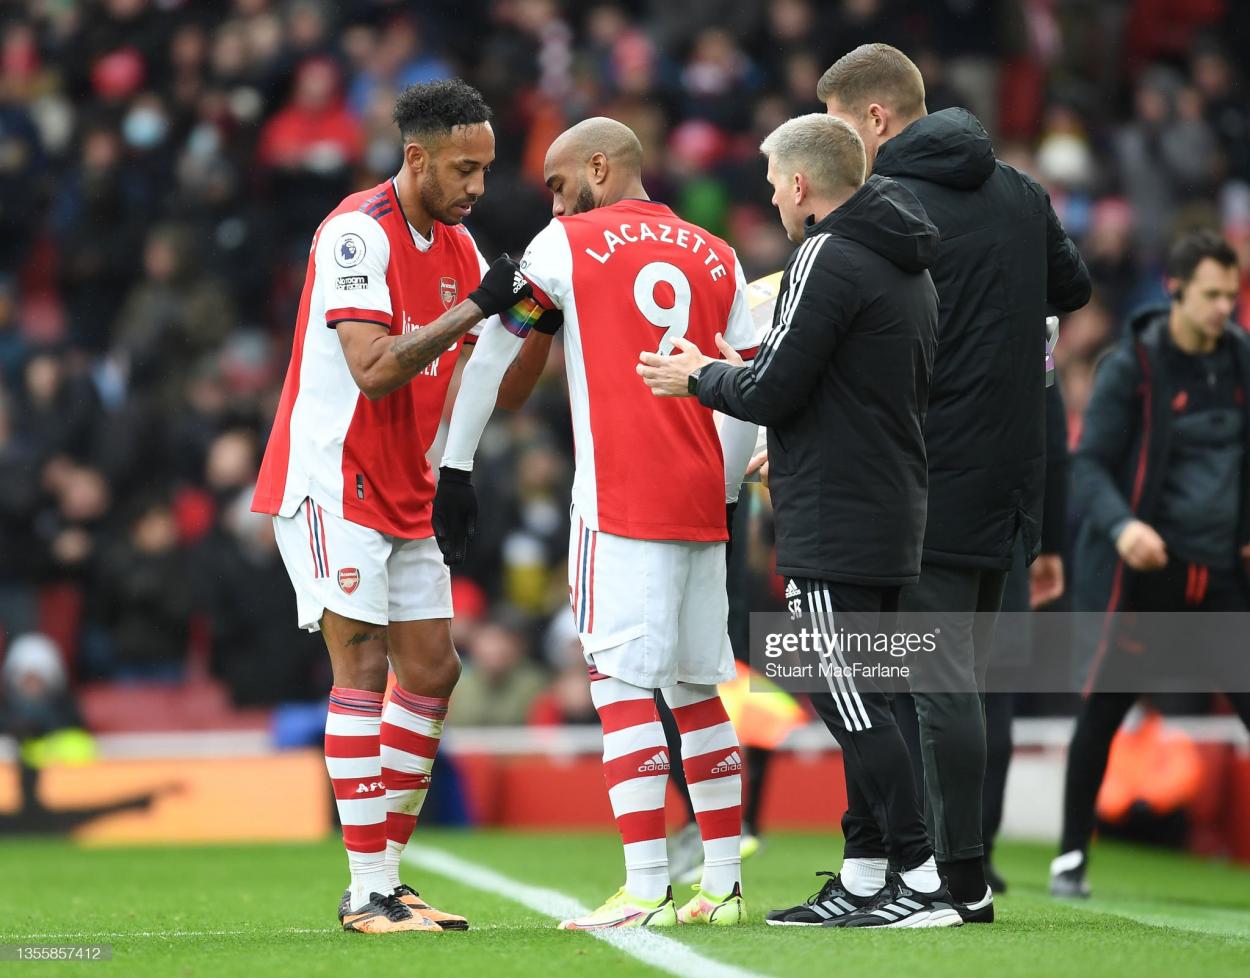 LONDON, ENGLAND - NOVEMBER 27: (L-R) Pierre-Emerick Aubameyang gives the captains armband to Alex Lacazette after his substitution during the Premier League match between Arsenal and Newcastle United at <strong><a  data-cke-saved-href='https://www.vavel.com/en/football/2022/04/24/arsenal/1109615-the-warmdown-arsenal-prove-too-much-for-united-in-race-for-top-four.html' href='https://www.vavel.com/en/football/2022/04/24/arsenal/1109615-the-warmdown-arsenal-prove-too-much-for-united-in-race-for-top-four.html'>Emirates Stadium</a></strong> on November 27, 2021 in London, England. (Photo by Stuart MacFarlane/Arsenal FC via Getty Images)